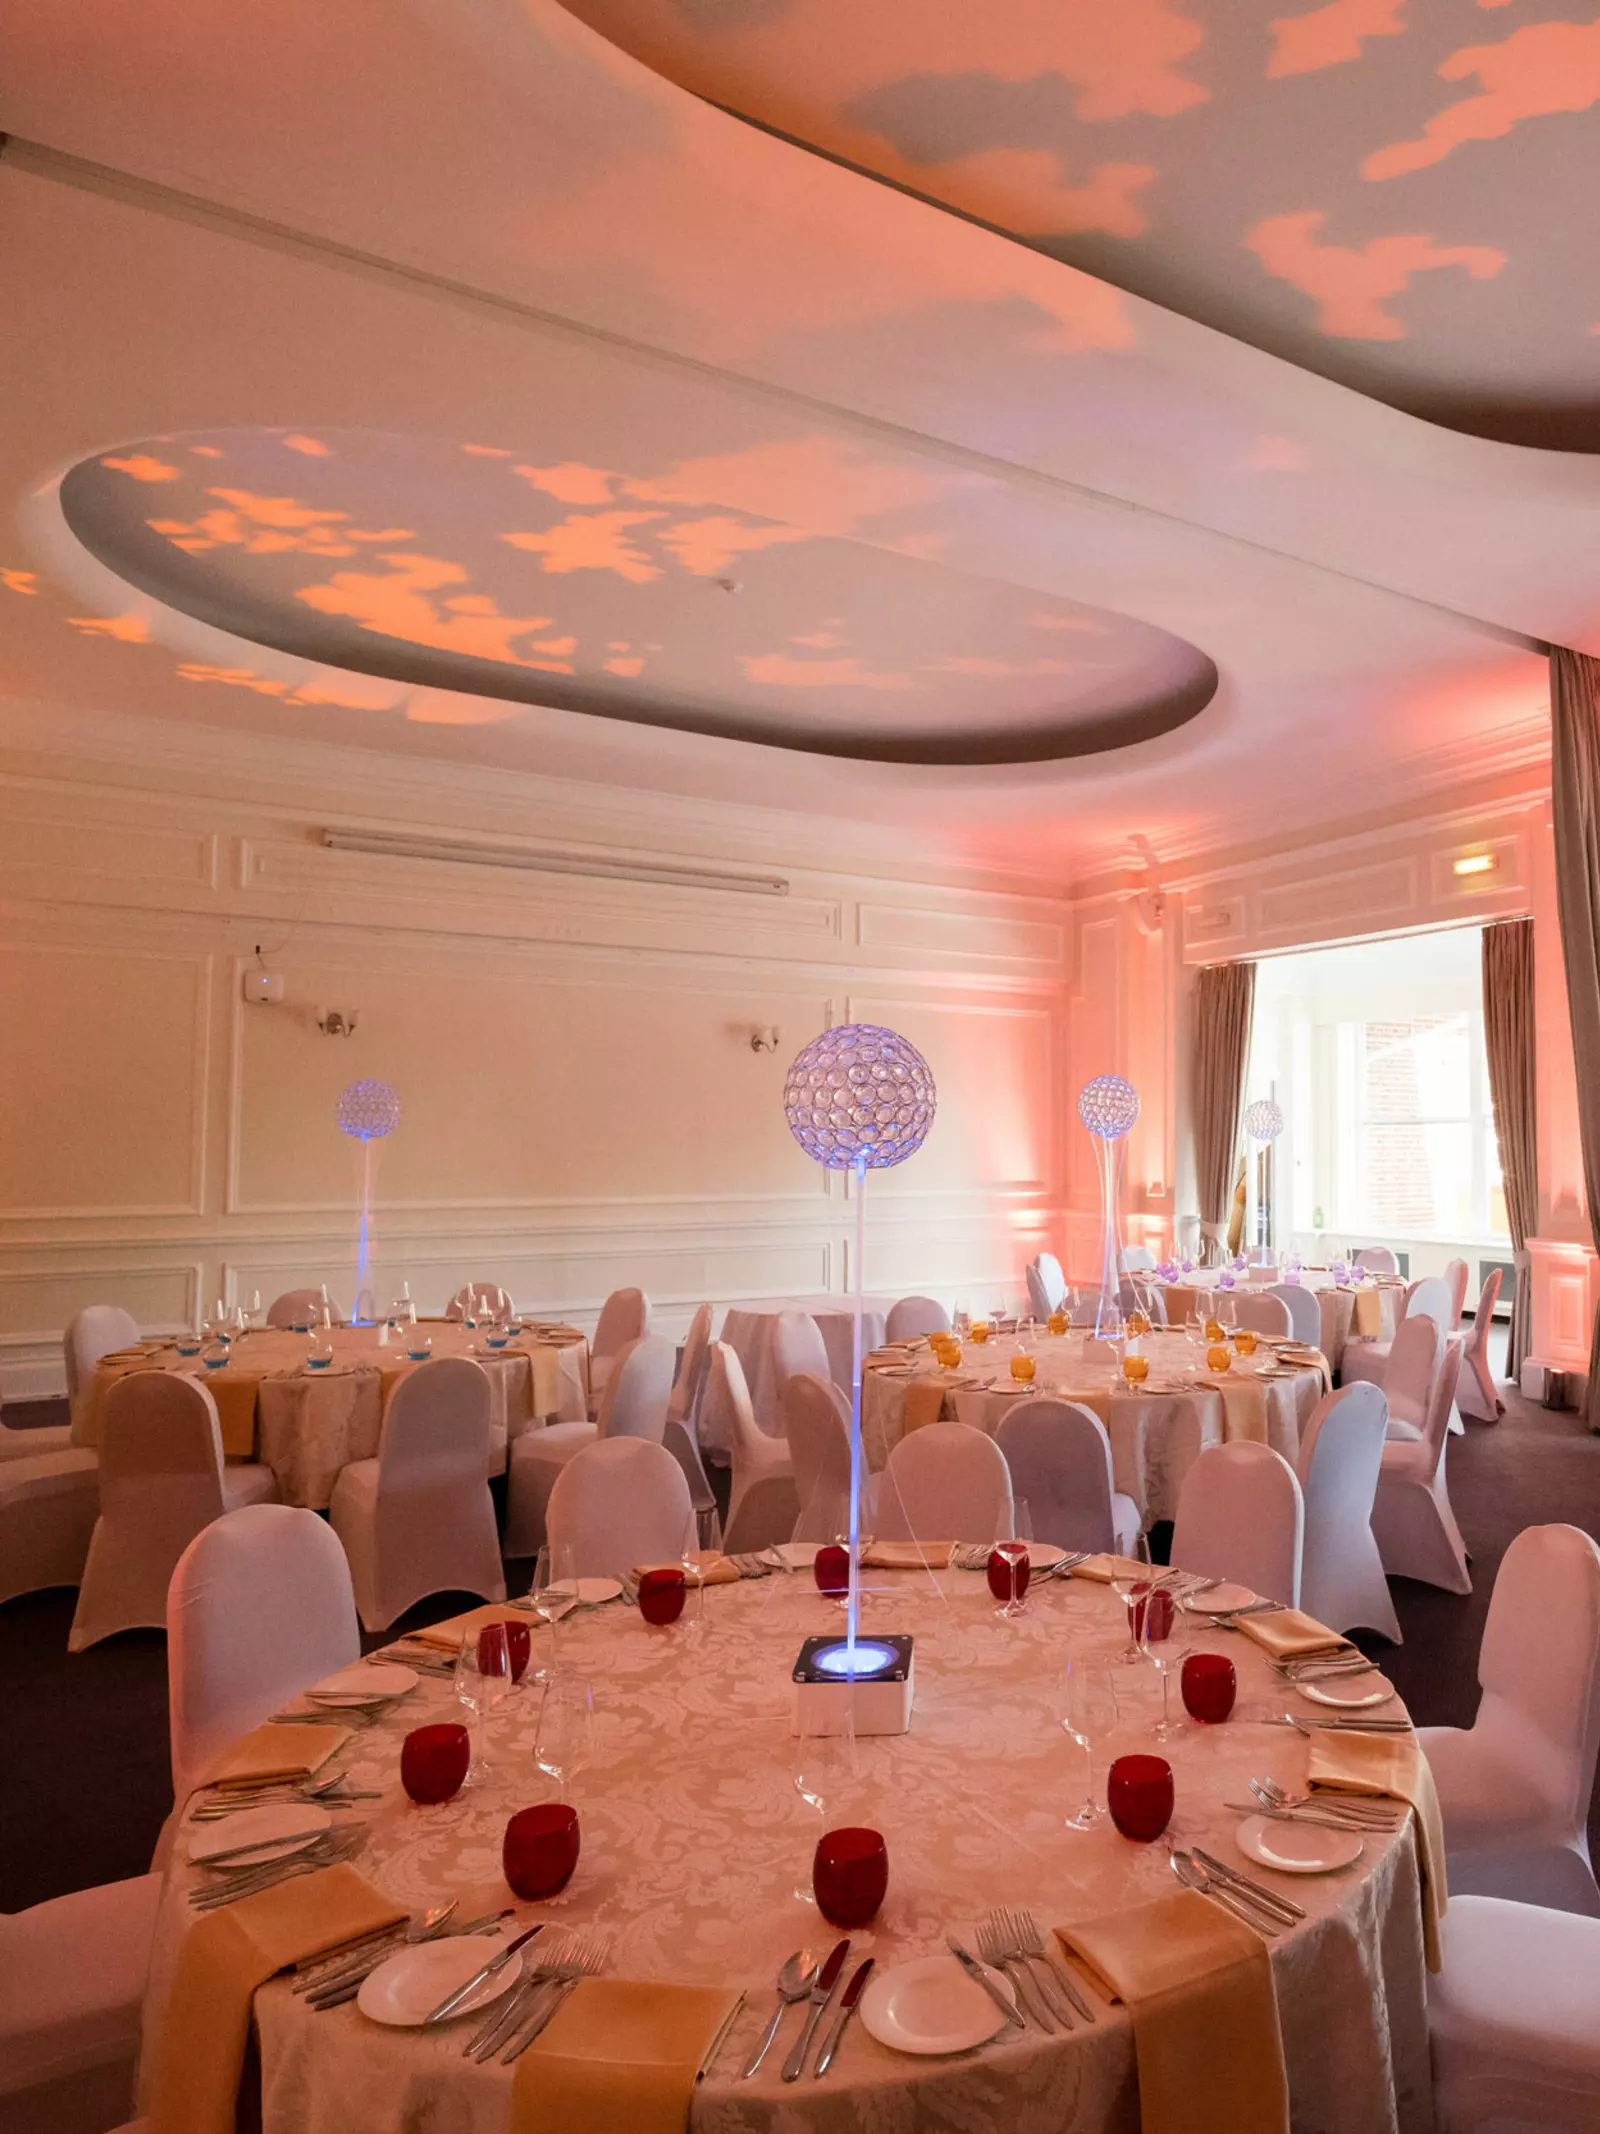 Prince Albert Suite tables decorted for an event